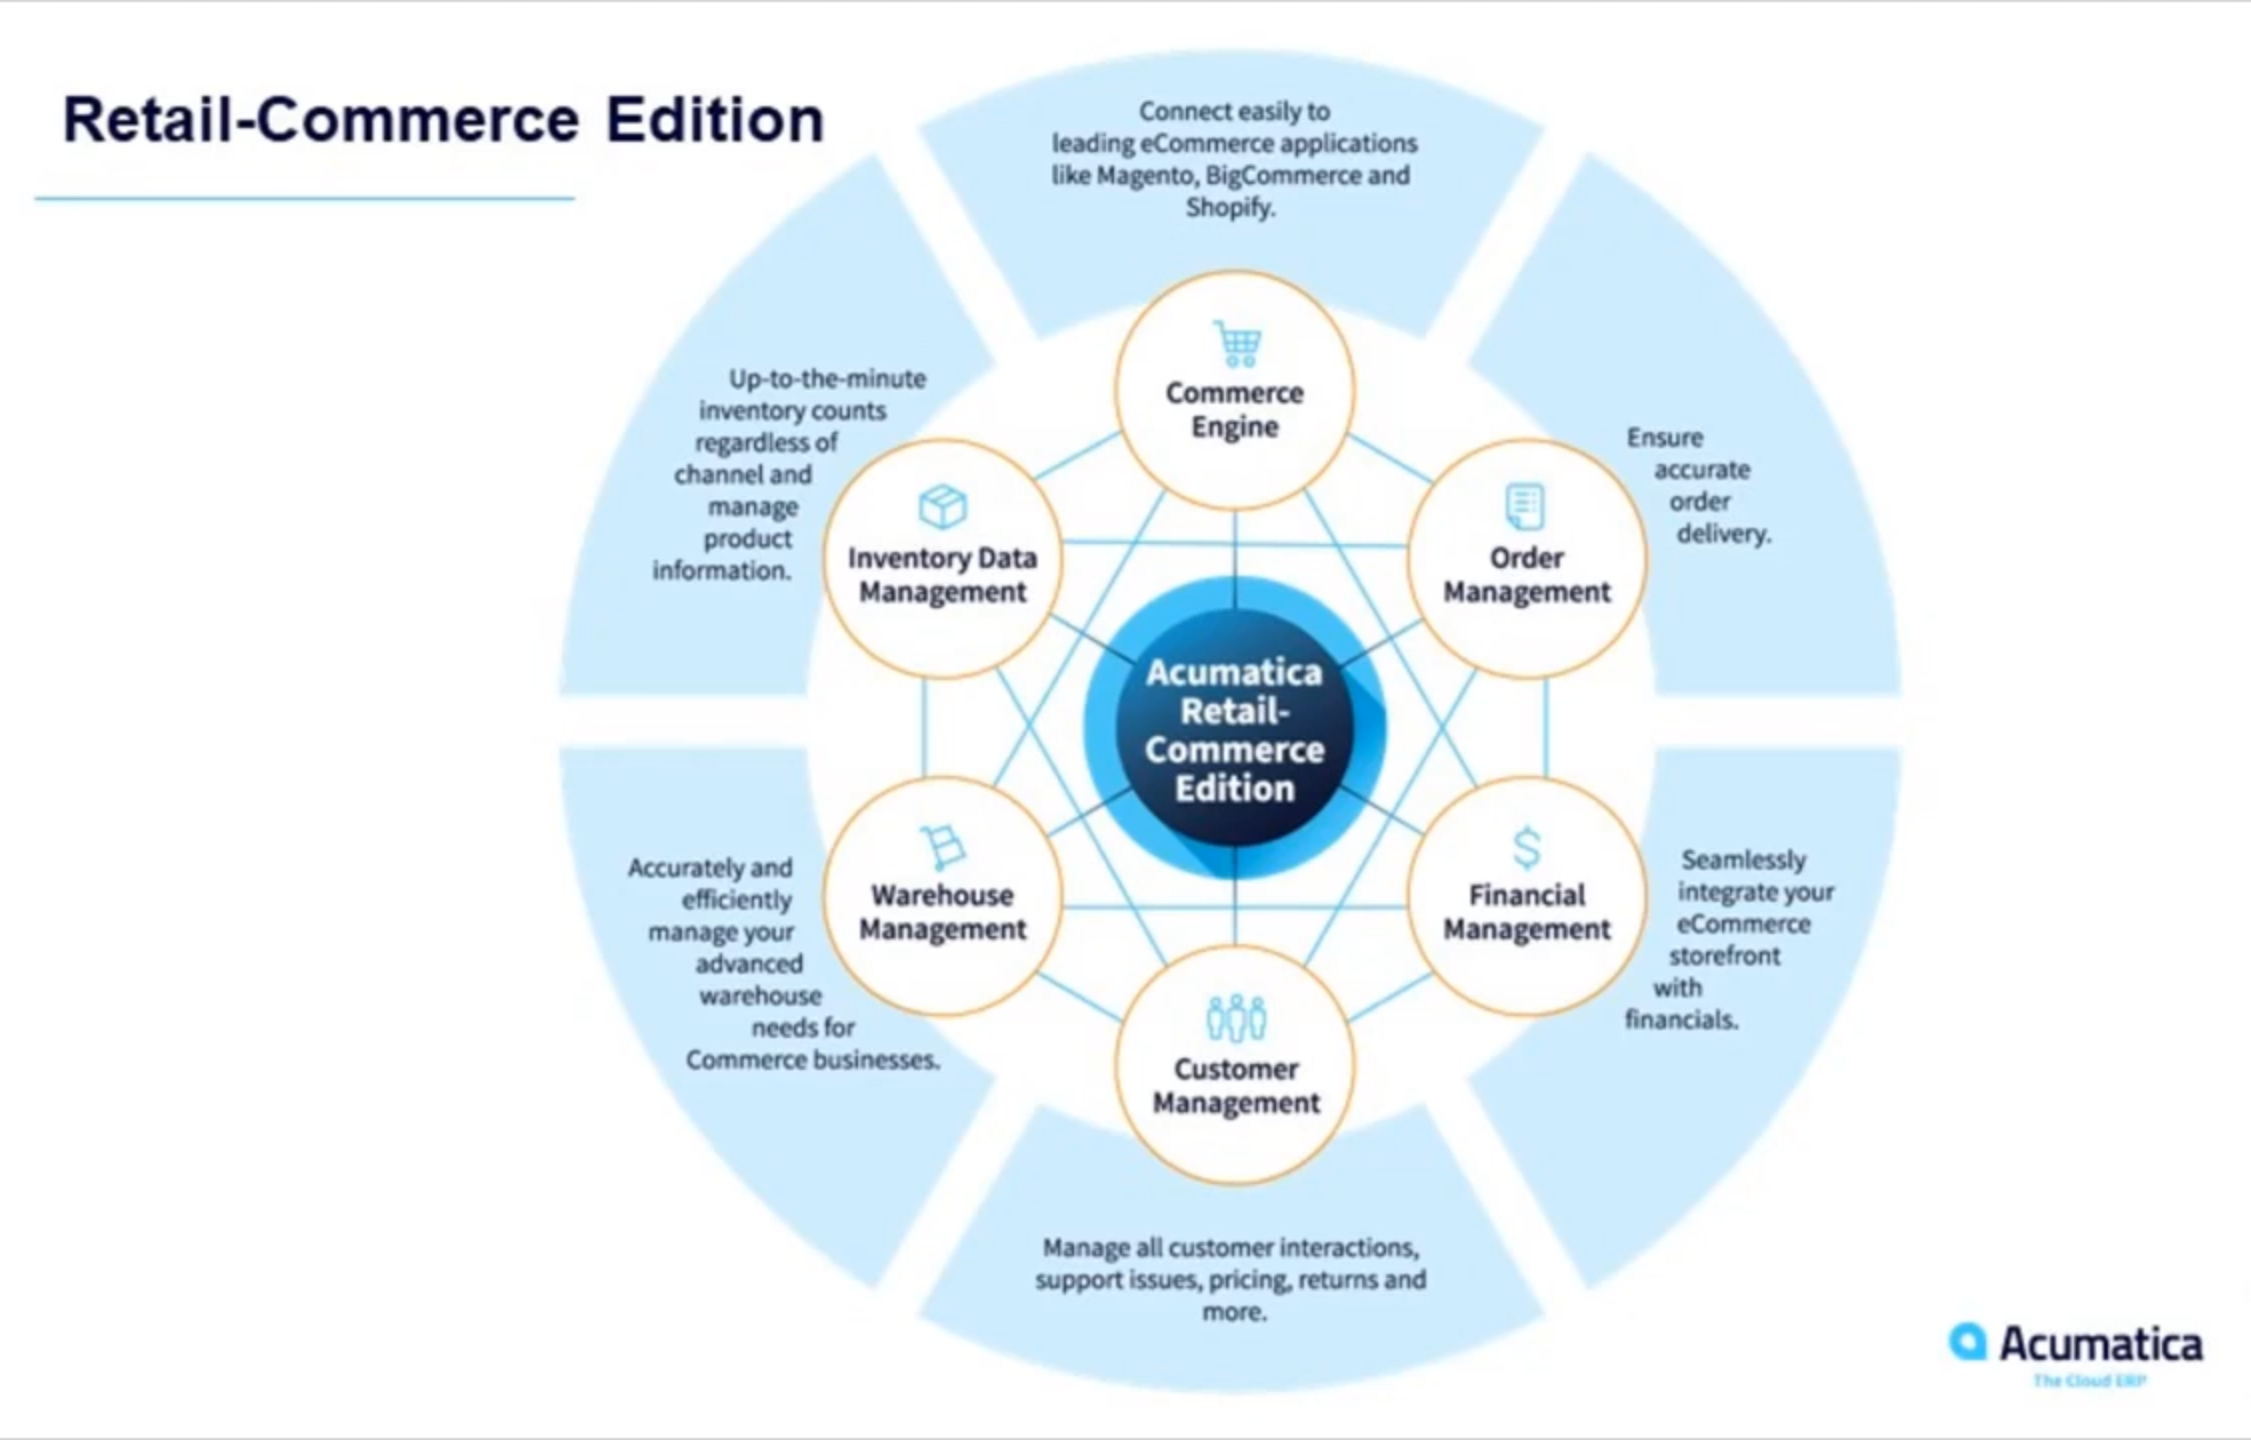 Prepare for Growth with Acumatica eCommerce Integration